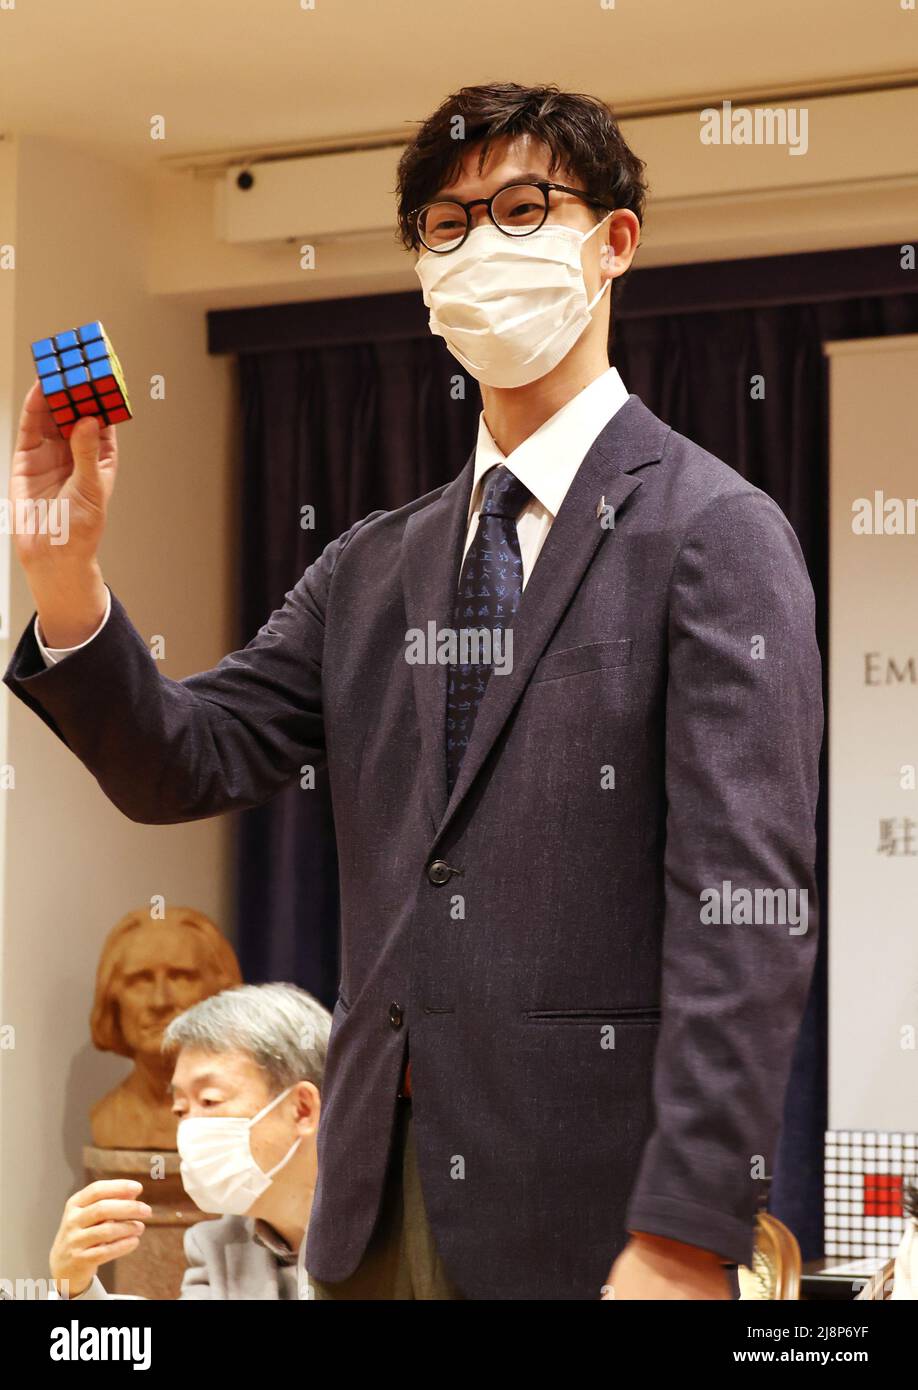 Tokyo, Japan. 17th May, 2022. Former world champion of the World Rubik's Cube Championship Shuhei Omura demonstrates a party to celebrate the publication of Japanese version of Erno Rubik's autobiography at the Hungarian embassy in Japan in Tokyo on Tuesday, May 17, 2022. Hungarian architect Erno Rubik developed a cubic mechanical puzzle 'Rubik's Cube' in 1974. Credit: Yoshio Tsunoda/AFLO/Alamy Live News Stock Photo